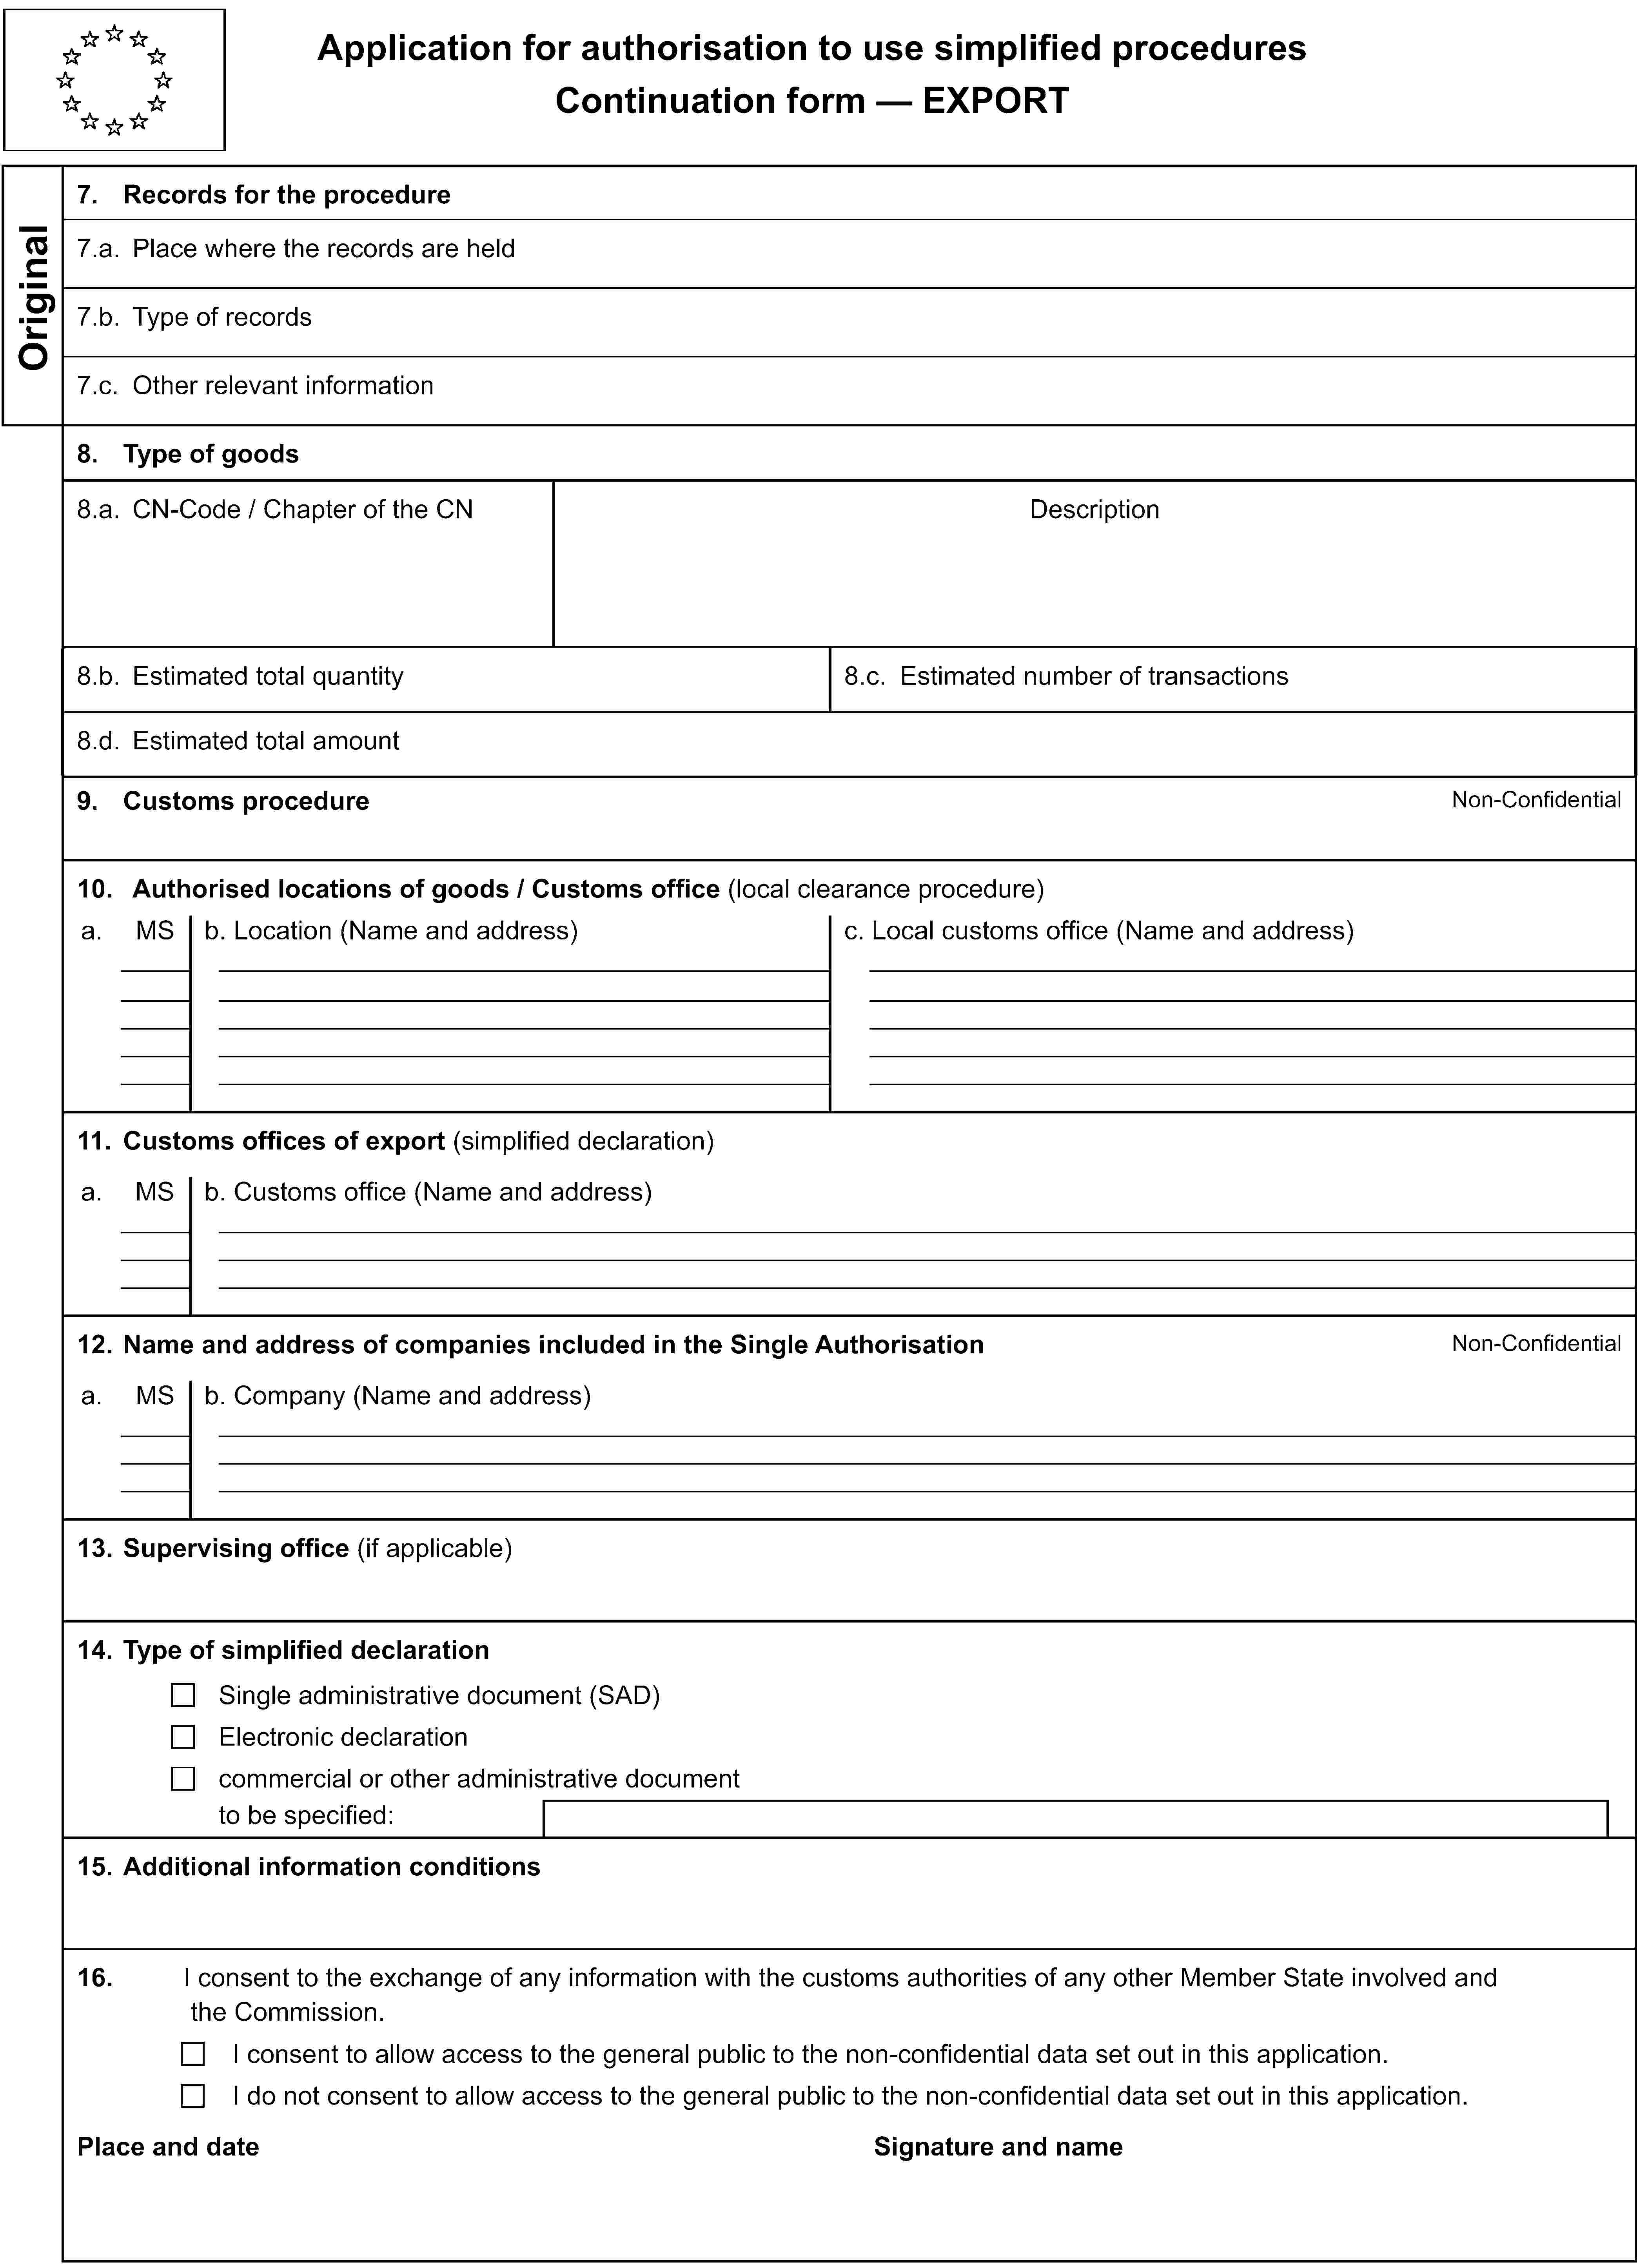 Application for authorisation to use simplified proceduresContinuation form — EXPORTOriginal7. Records for the procedure7.a. Place where the records are held7.b. Type of records7.c. Other relevant information8. Type of goods8.a. CN-Code / Chapter of the CNDescription8.b. Estimated total quantity8.c. Estimated number of transactions8.d. Estimated total amount9. Customs procedureNon-Confidential10. Authorised locations of goods / Customs office (local clearance procedure)a.MSb. Location (Name and address)c. Local customs office (Name and address)11. Customs offices of export (simplified declaration)a.MSb. Customs office (Name and address)12. Name and address of companies included in the Single AuthorisationNon-Confidentiala.MSb. Company (Name and address)13. Supervising office (if applicable)14. Type of simplified declarationSingle administrative document (SAD)Electronic declarationcommercial or other administrative documentto be specified:15. Additional information conditions16.I consent to the exchange of any information with the customs authorities of any other Member State involved and the Commission.I consent to allow access to the general public to the non-confidential data set out in this application.I do not consent to allow access to the general public to the non-confidential data set out in this application.Place and dateSignature and name